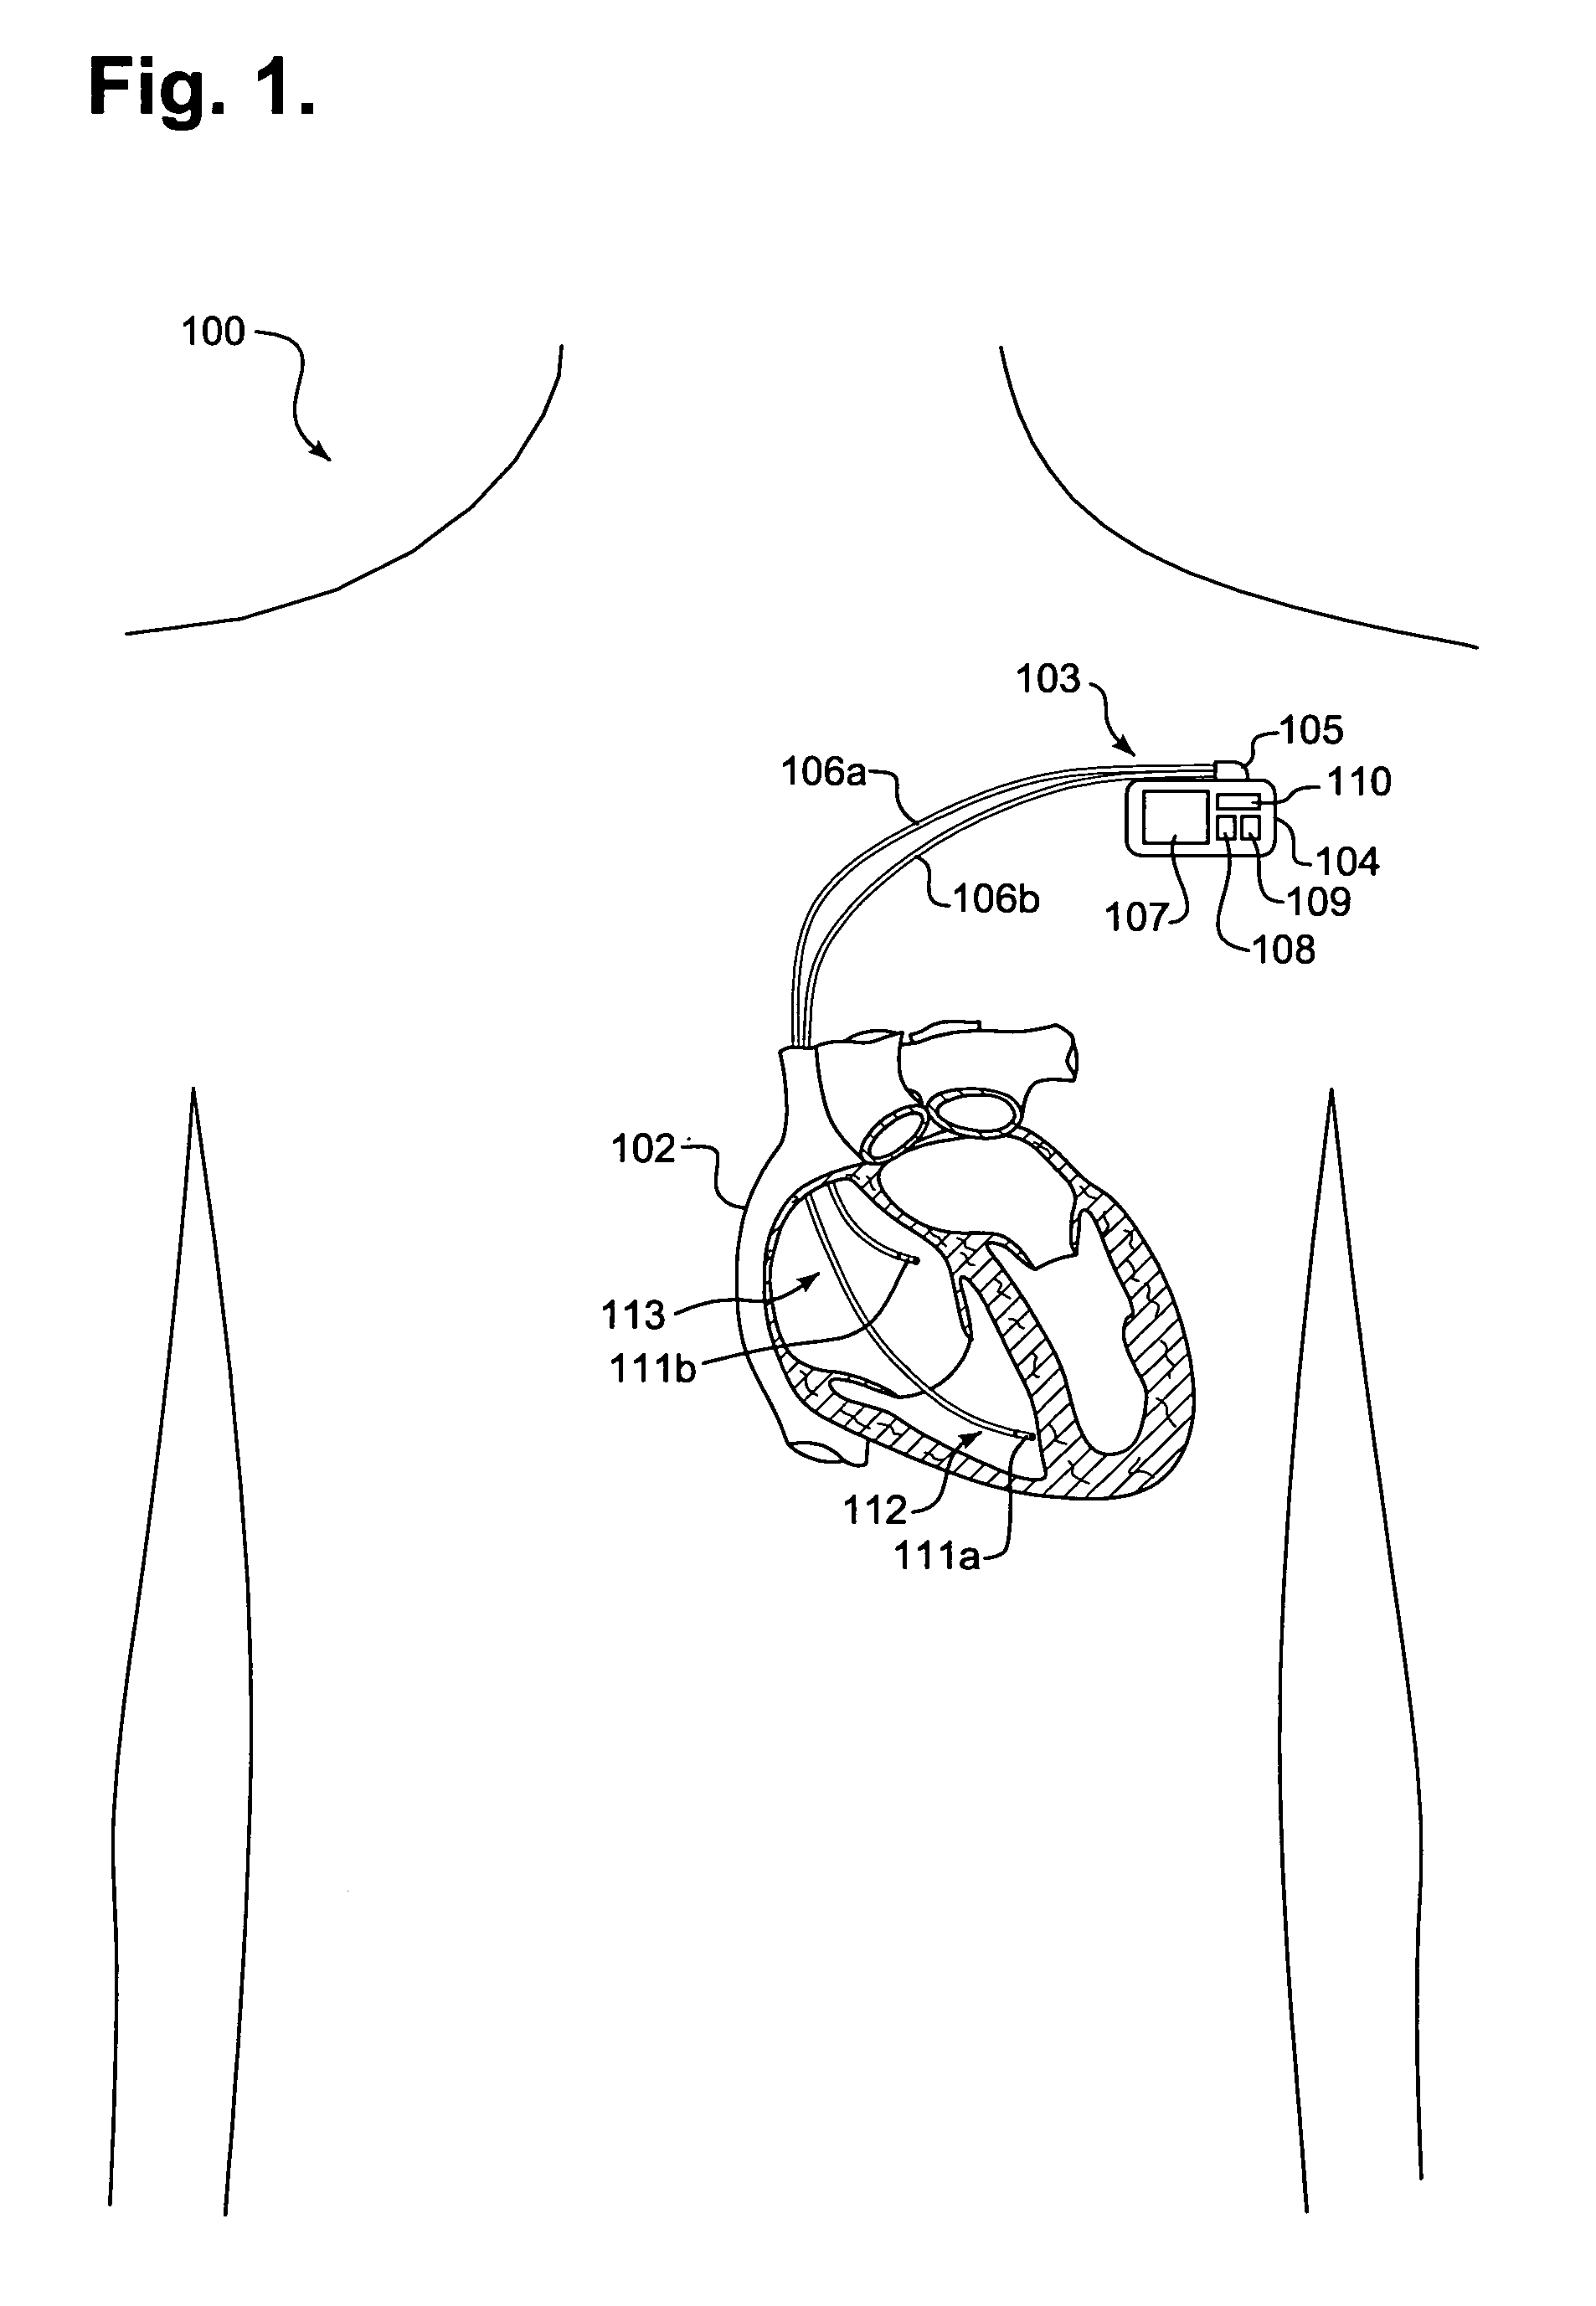 System and method for assessing cardiac performance through transcardiac impedance monitoring